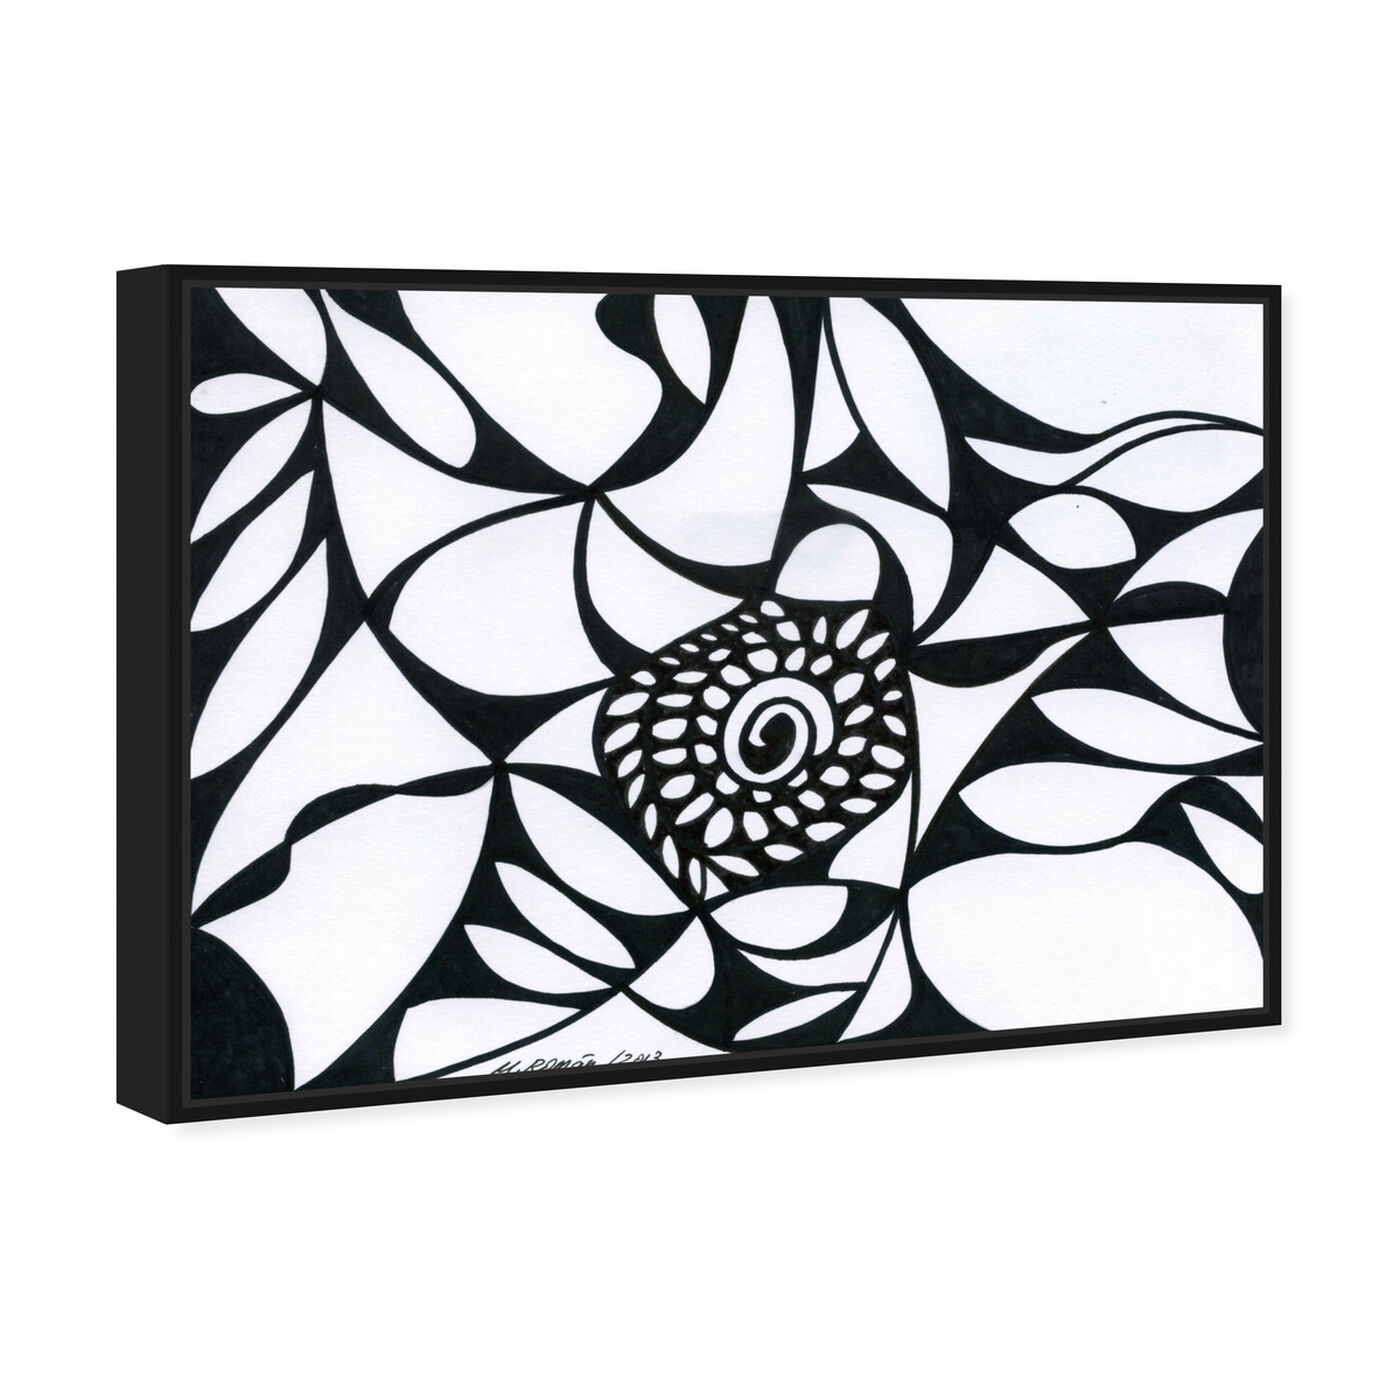 Angled view of Blossom featuring abstract and shapes art.